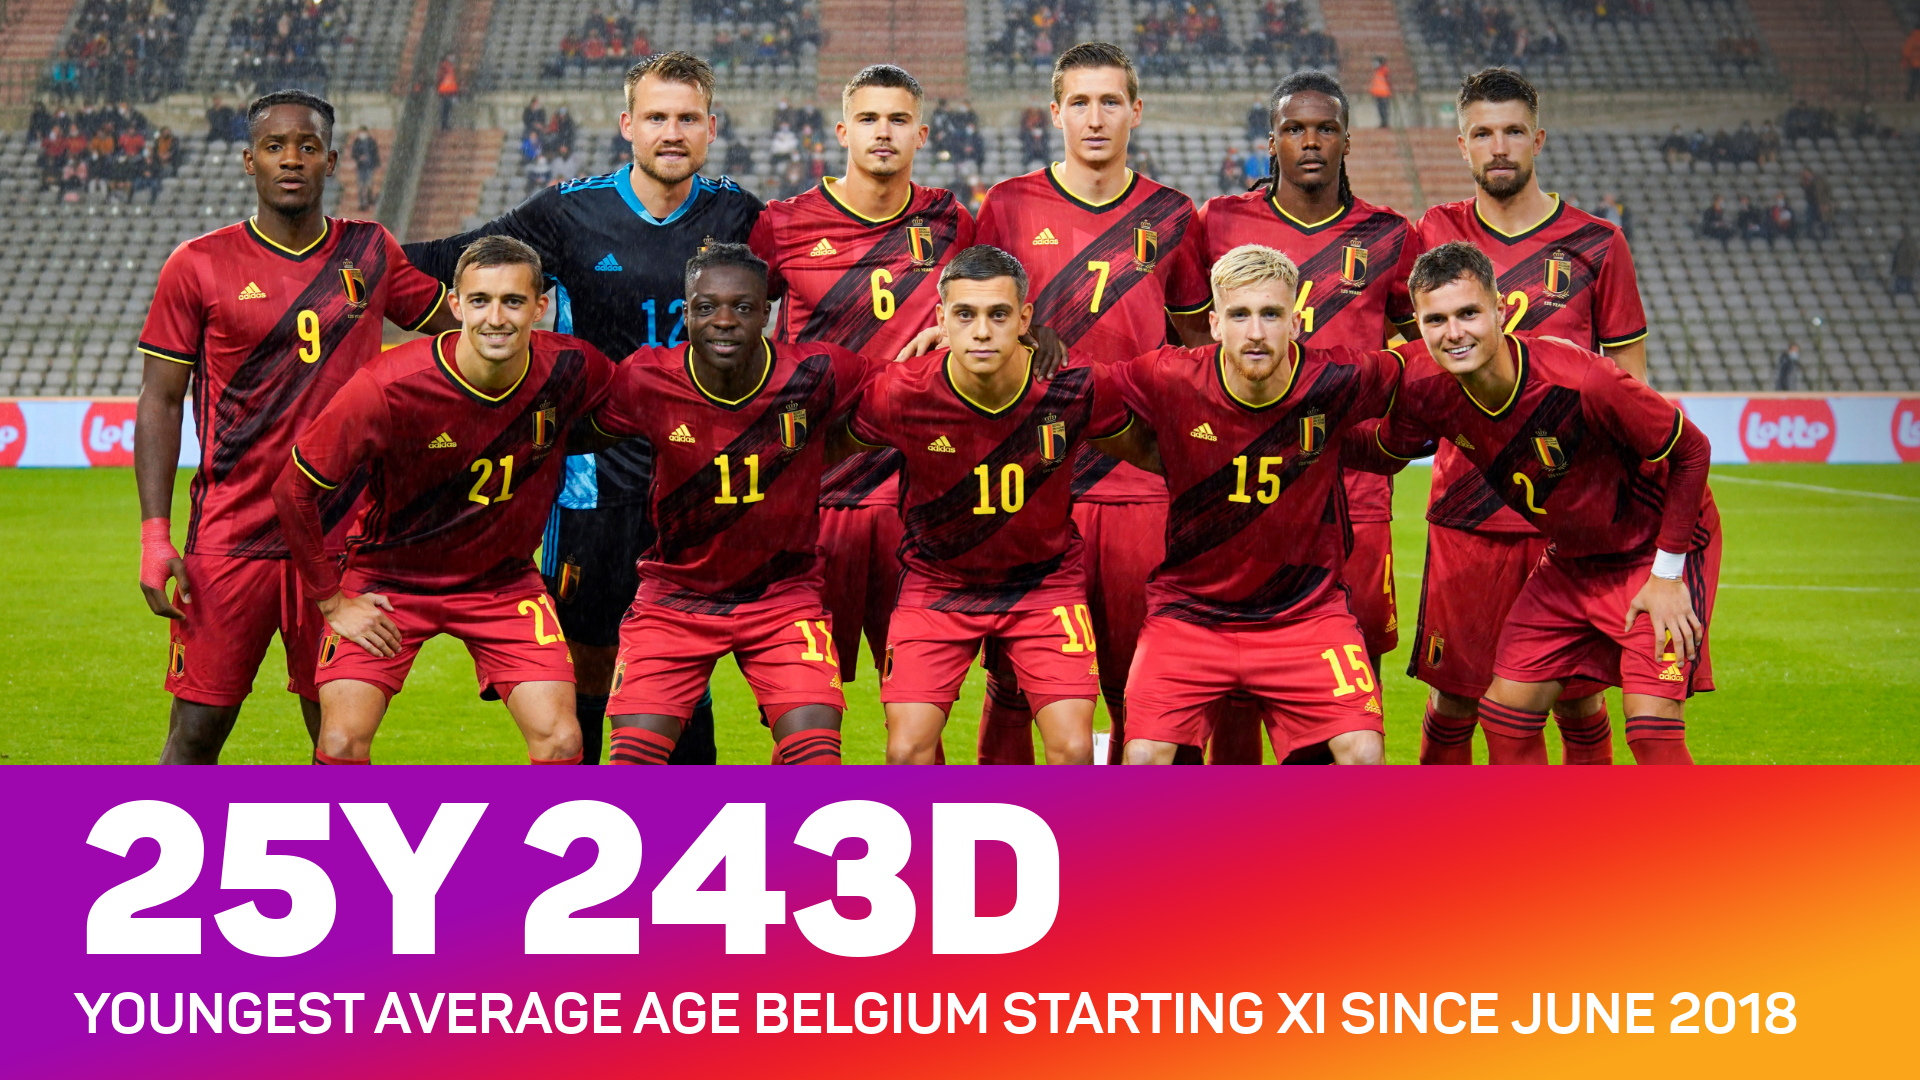 Belgium's youngest team since before the last World Cup had an average age of 25y and 243d